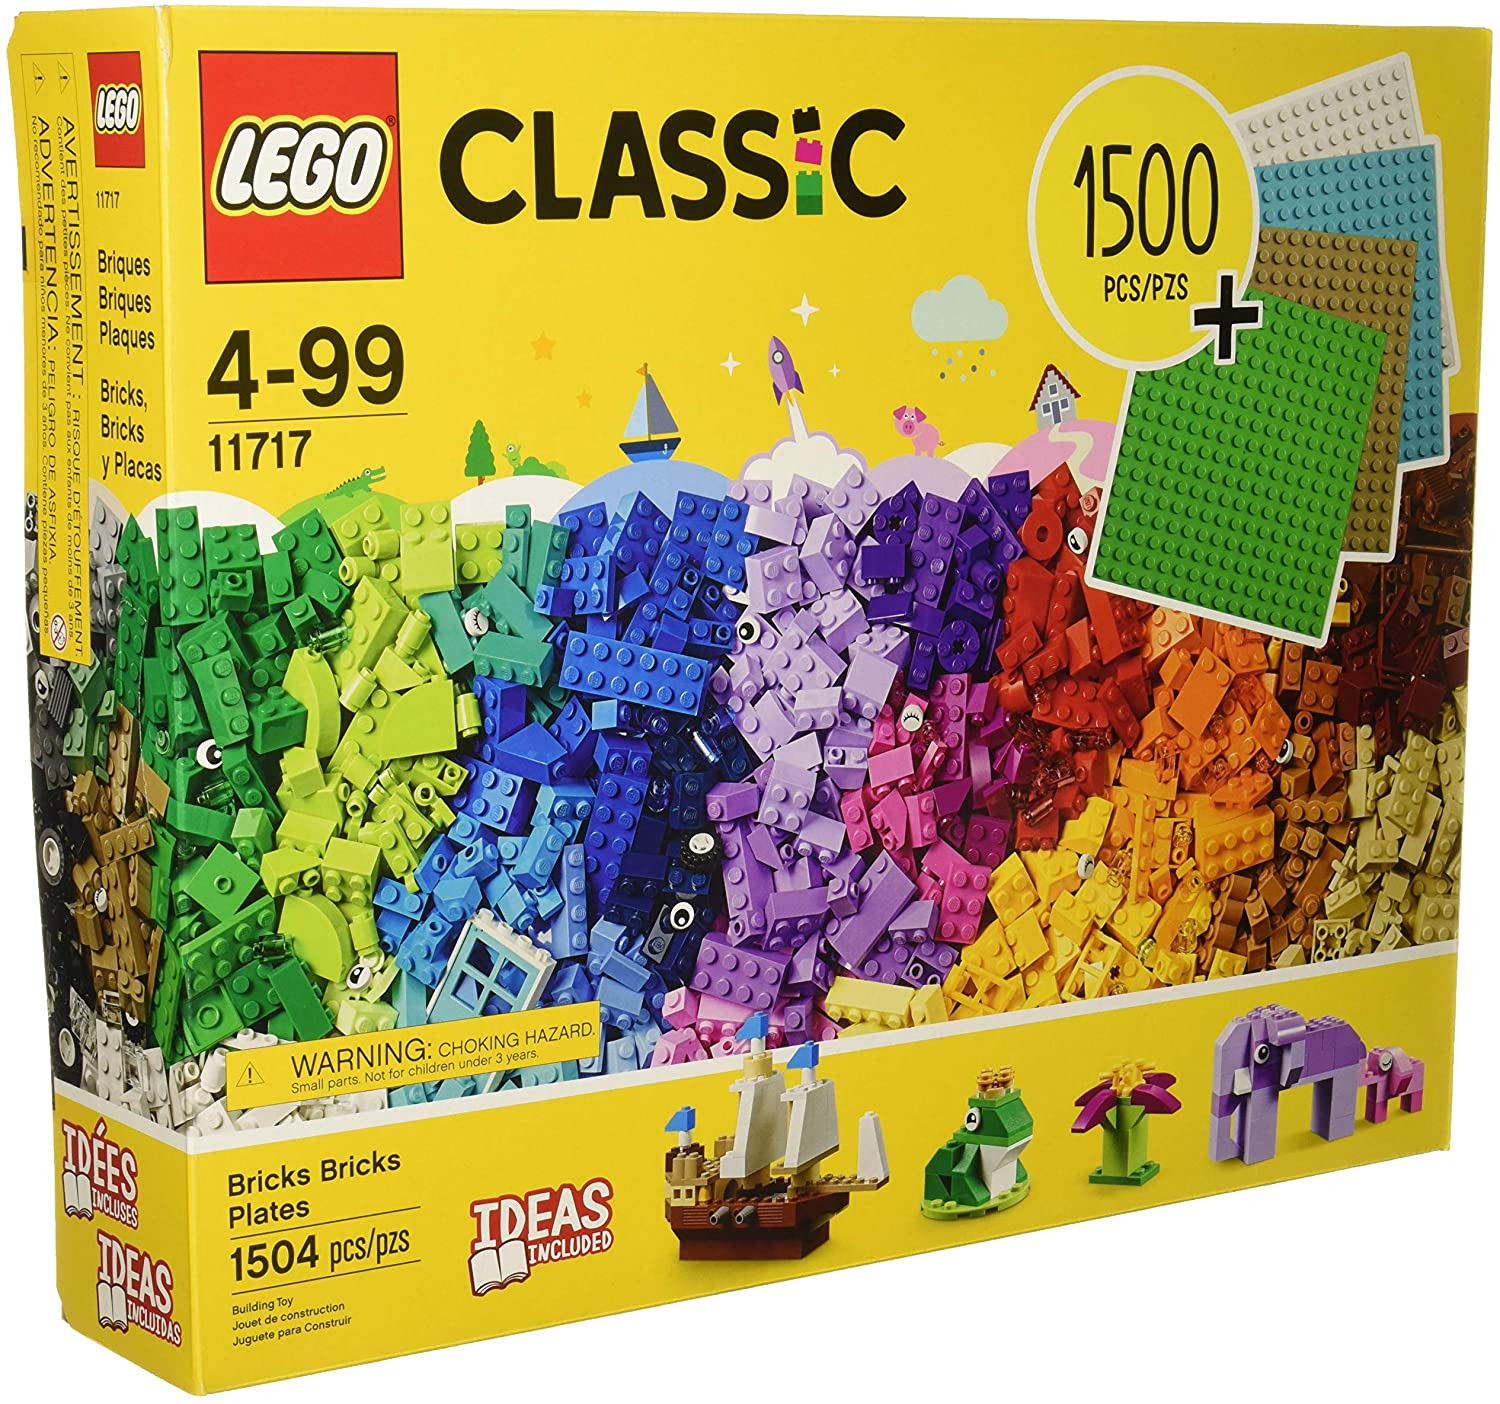 LEGO Classic Bricks Bricks Plates 1504 Pieces with Plates Included (11717)